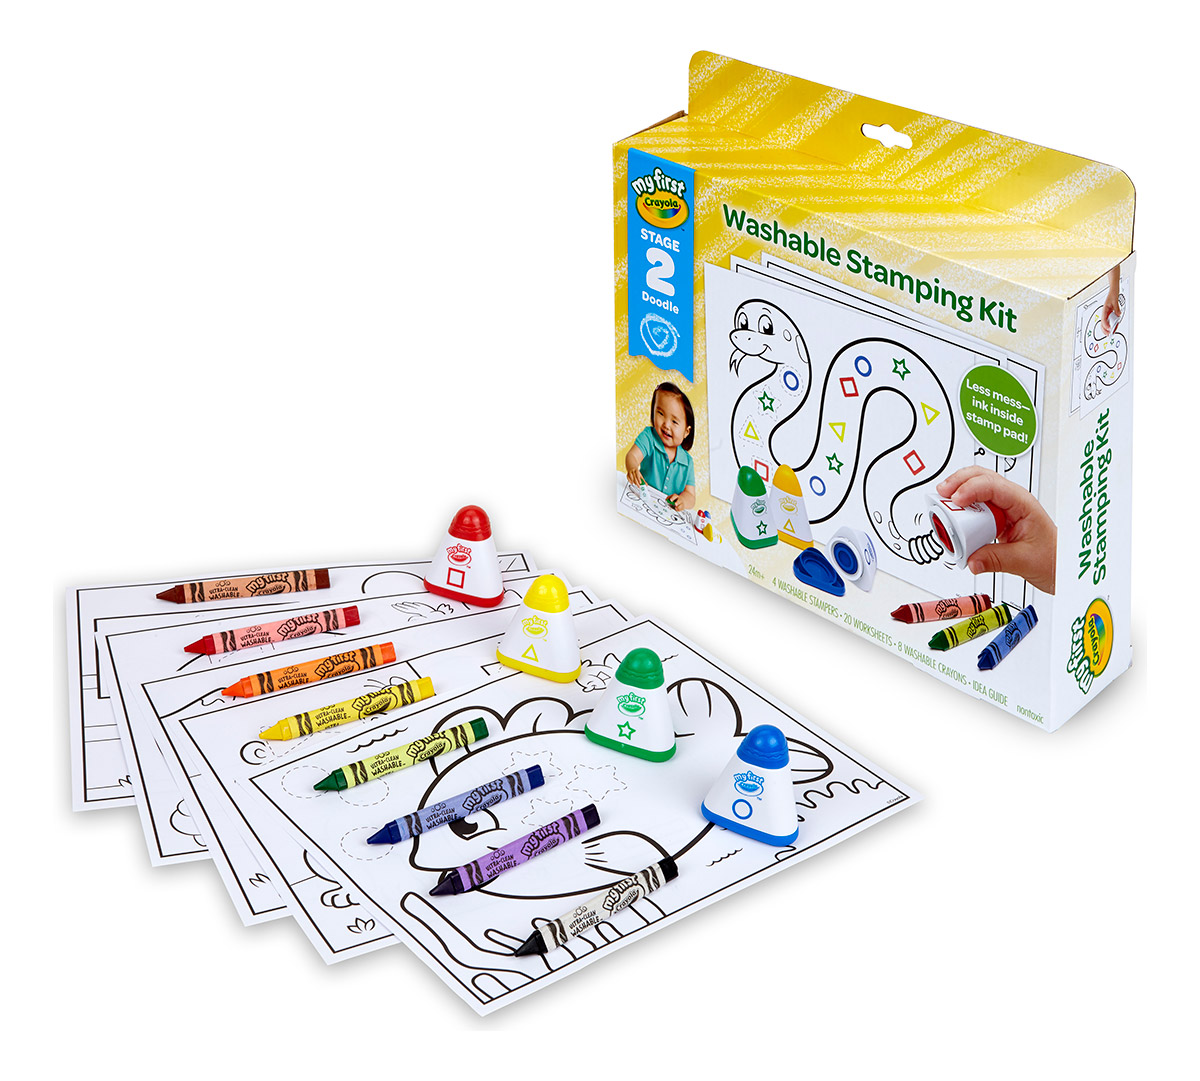 stamp sets for toddlers